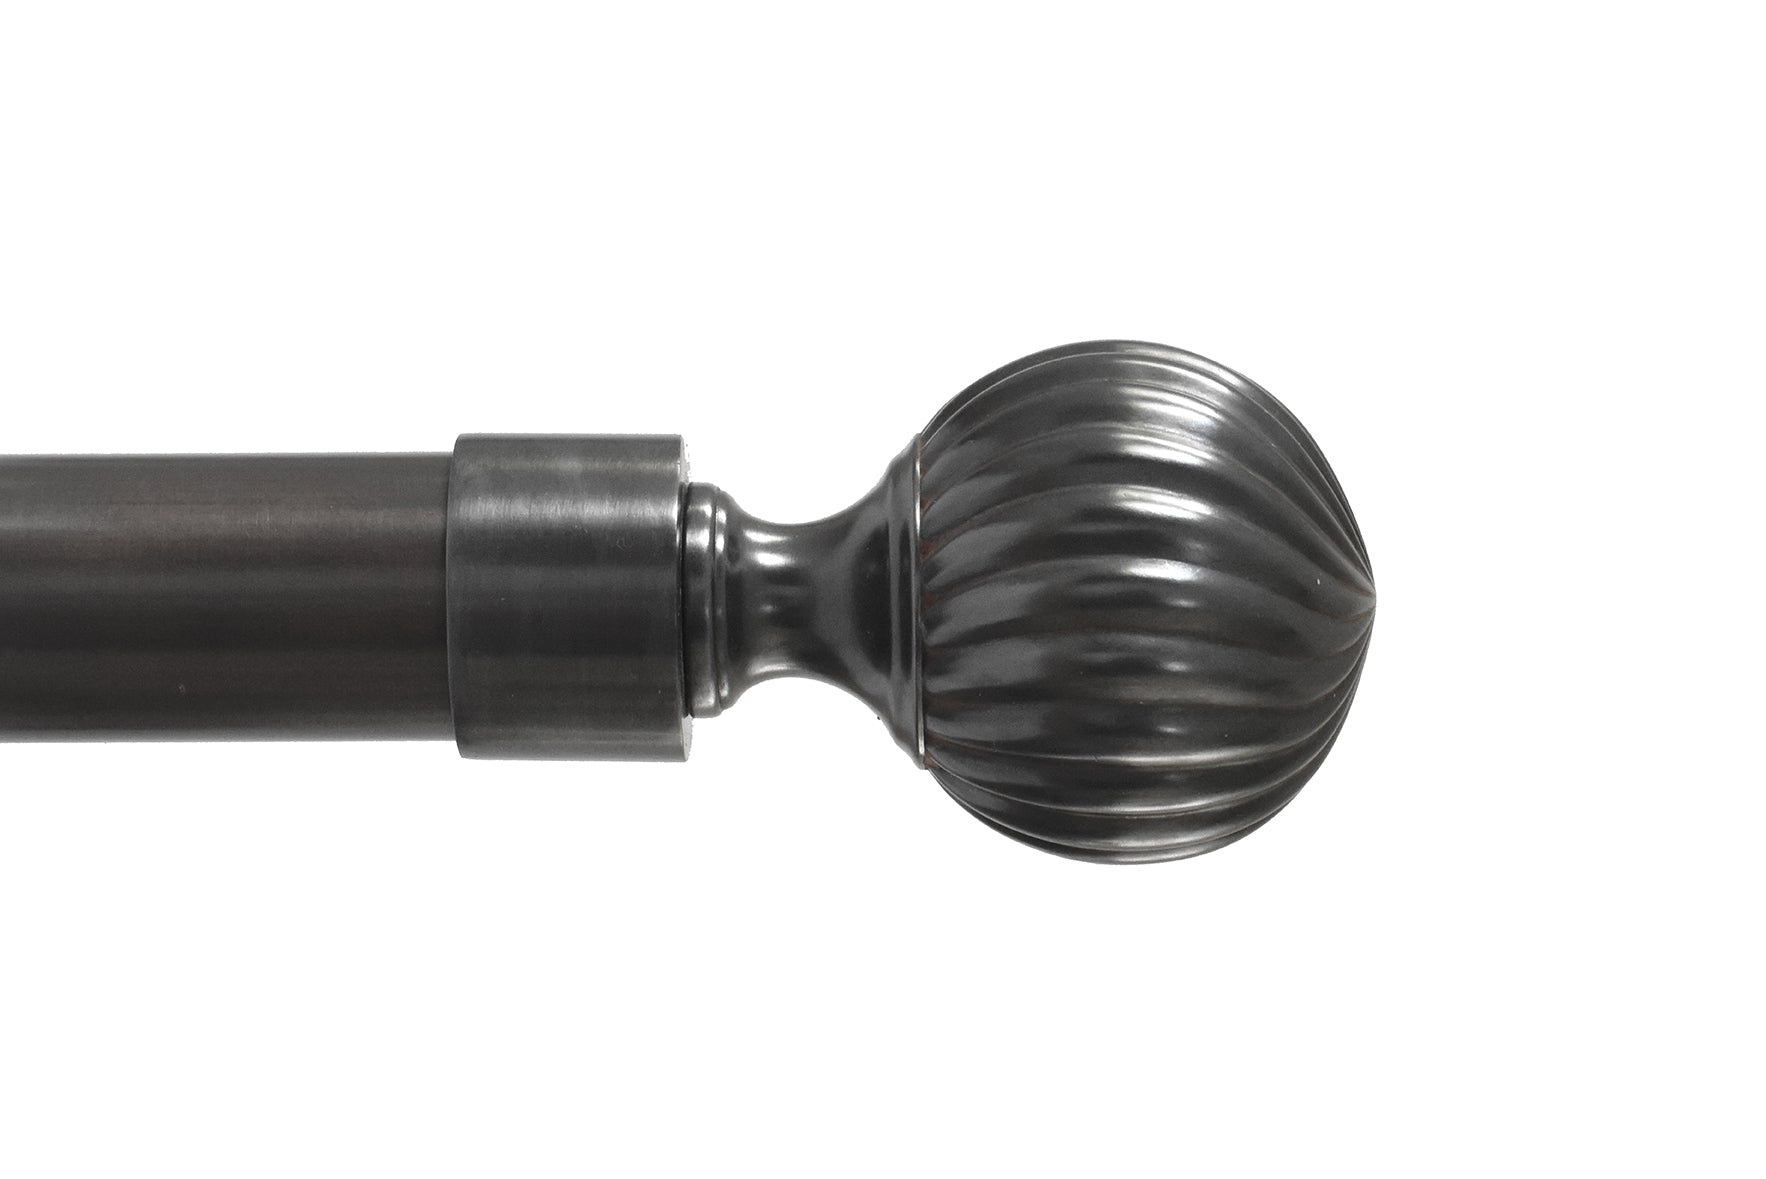 Tillys Classic Twisted Ball Finial Curtain Pole Set in Gunmetal